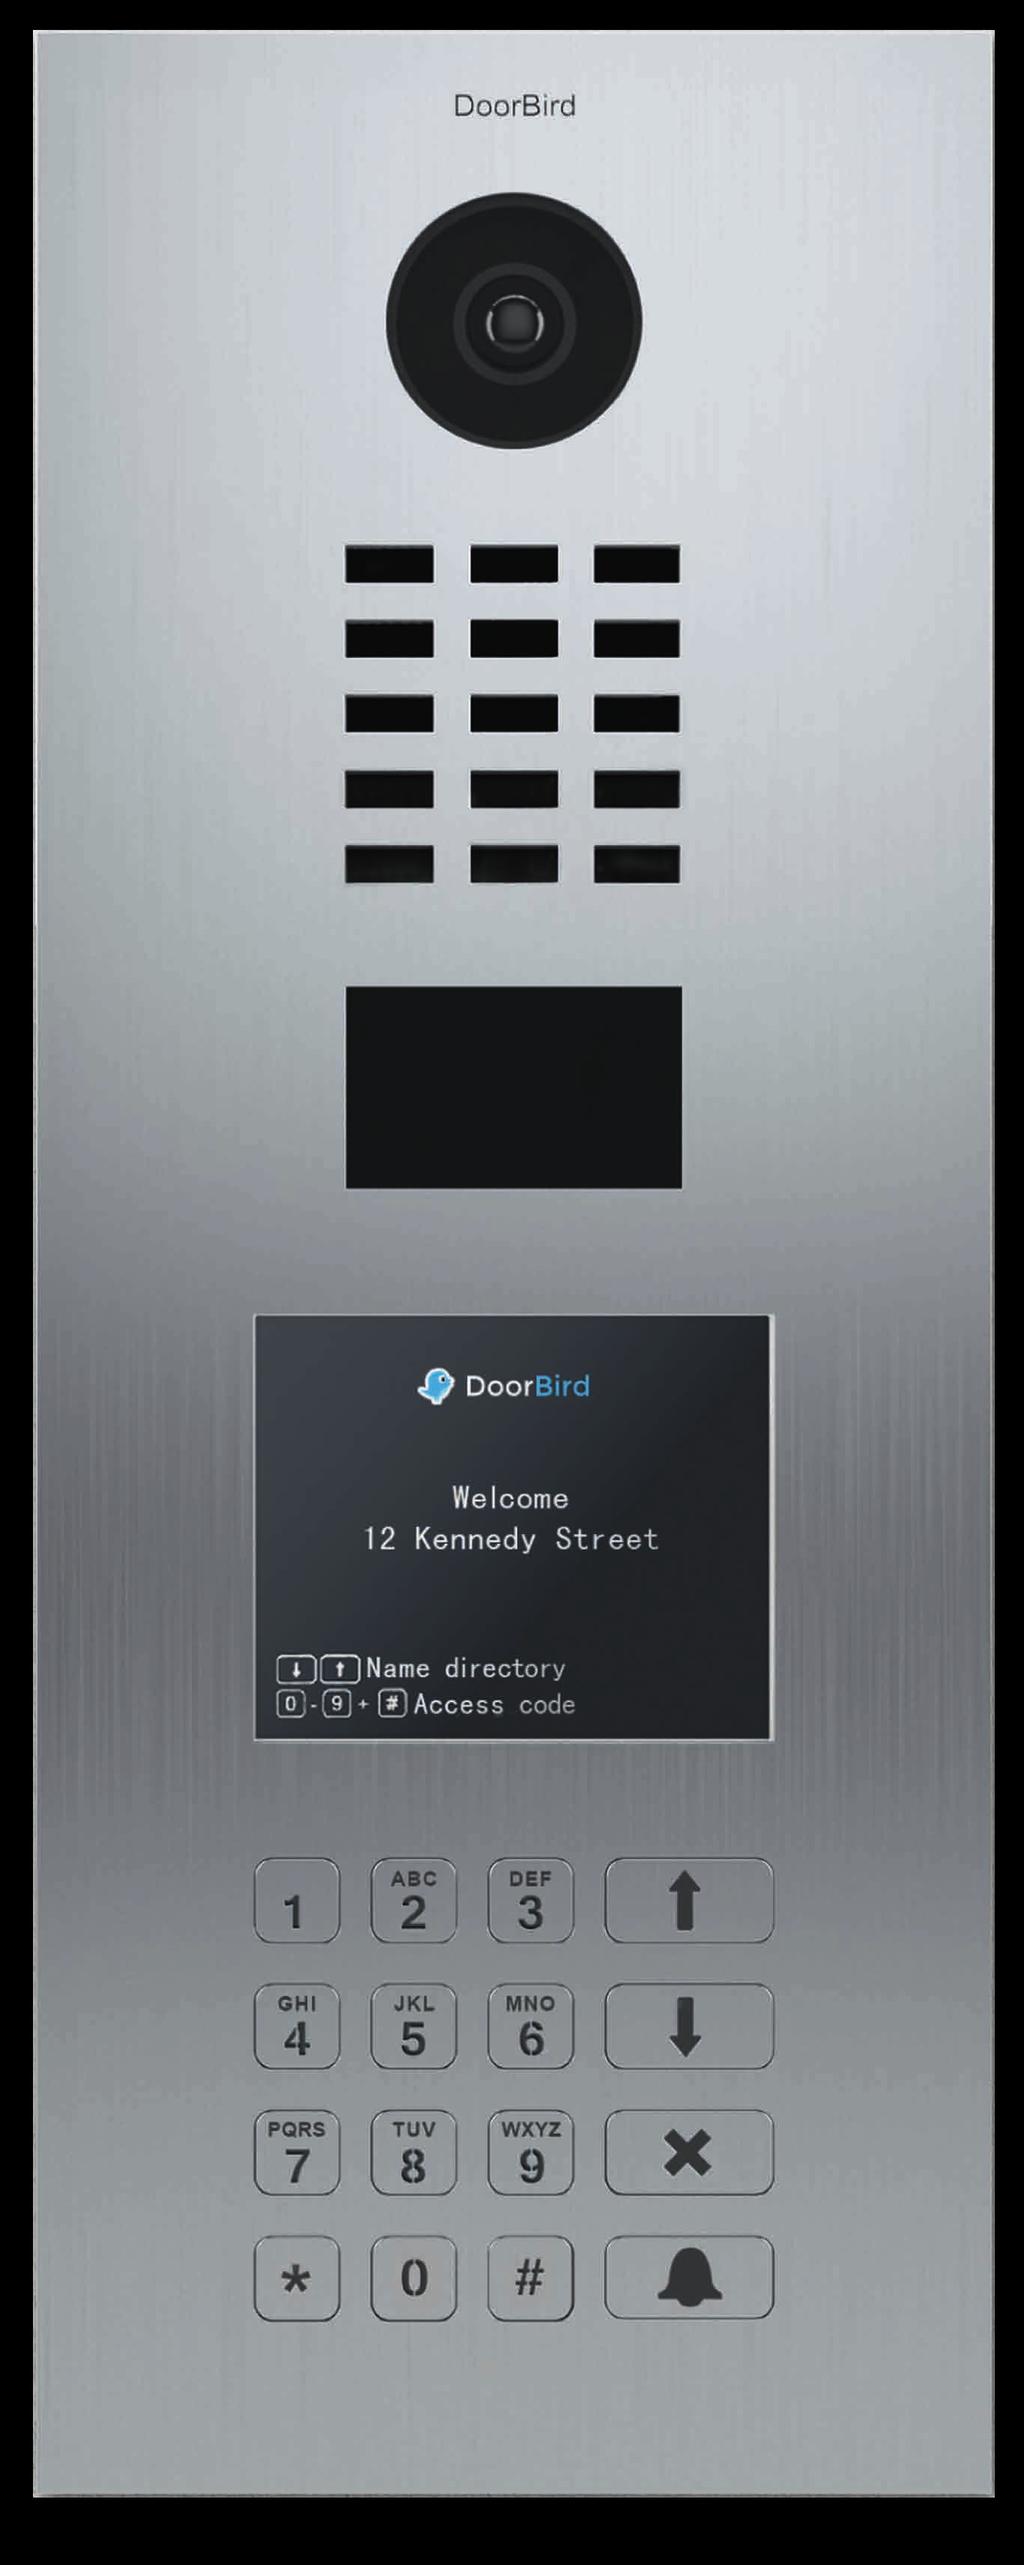 DB-D21DKV Apartment Video & Audio IP Intercom Dimensions: L402mm x W156mm x D49mm The DB-D21DKV combines ease of use & convenience with both audio & video push notifications directly to your